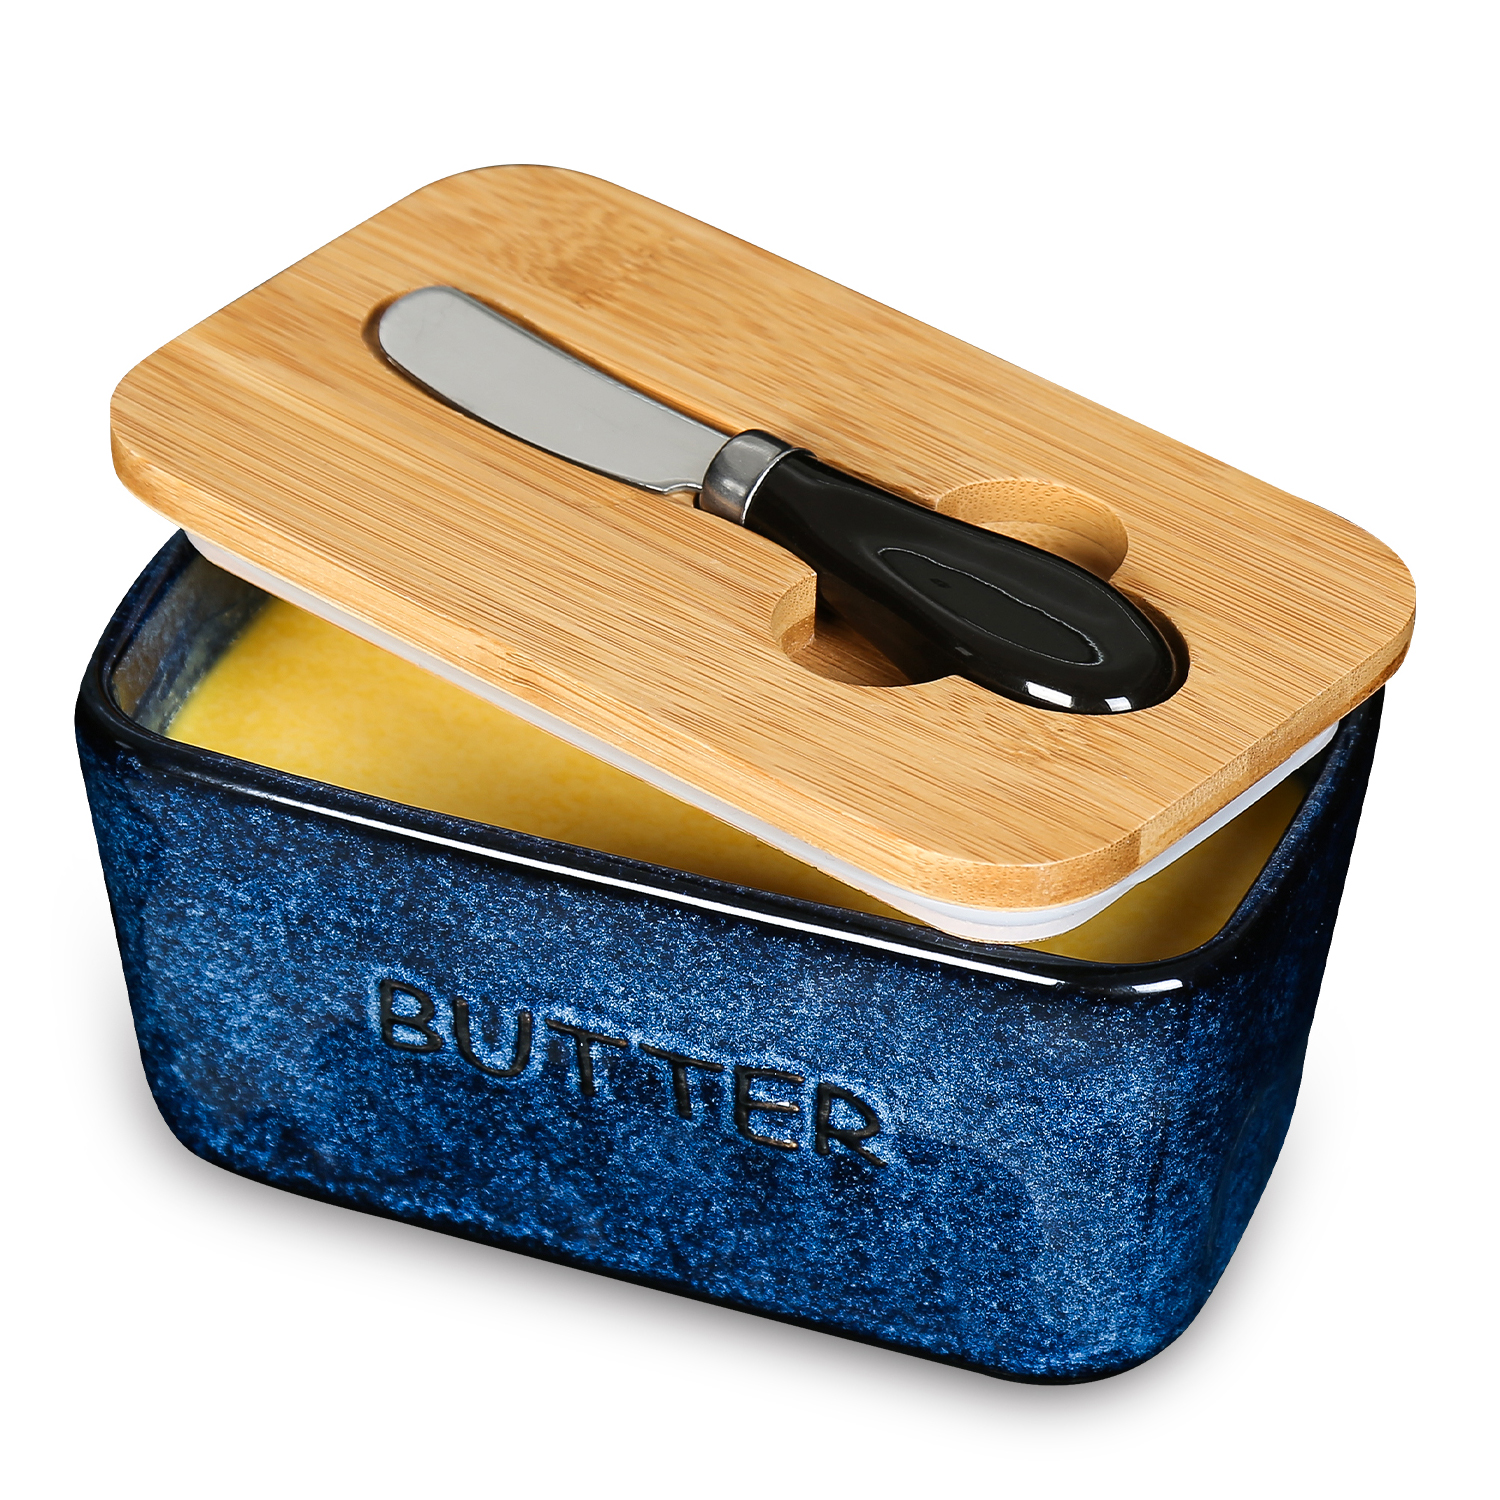 Butter Dish with Lid Knife Ceramic， Airtight Black Porcelain